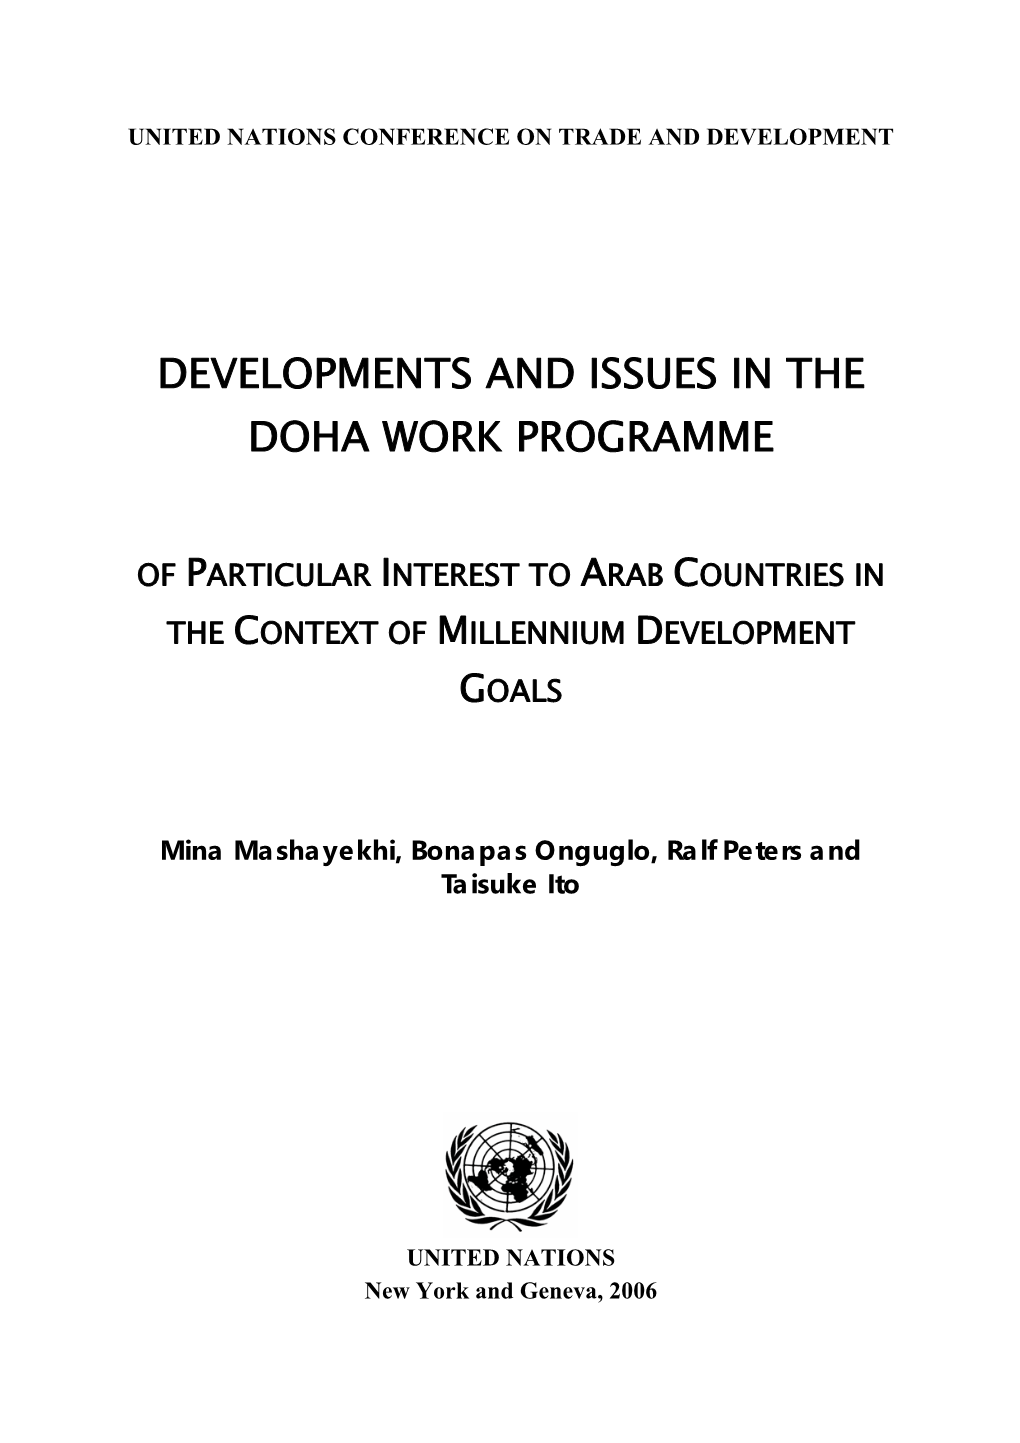 Developments and Issues in the Doha Work Programme